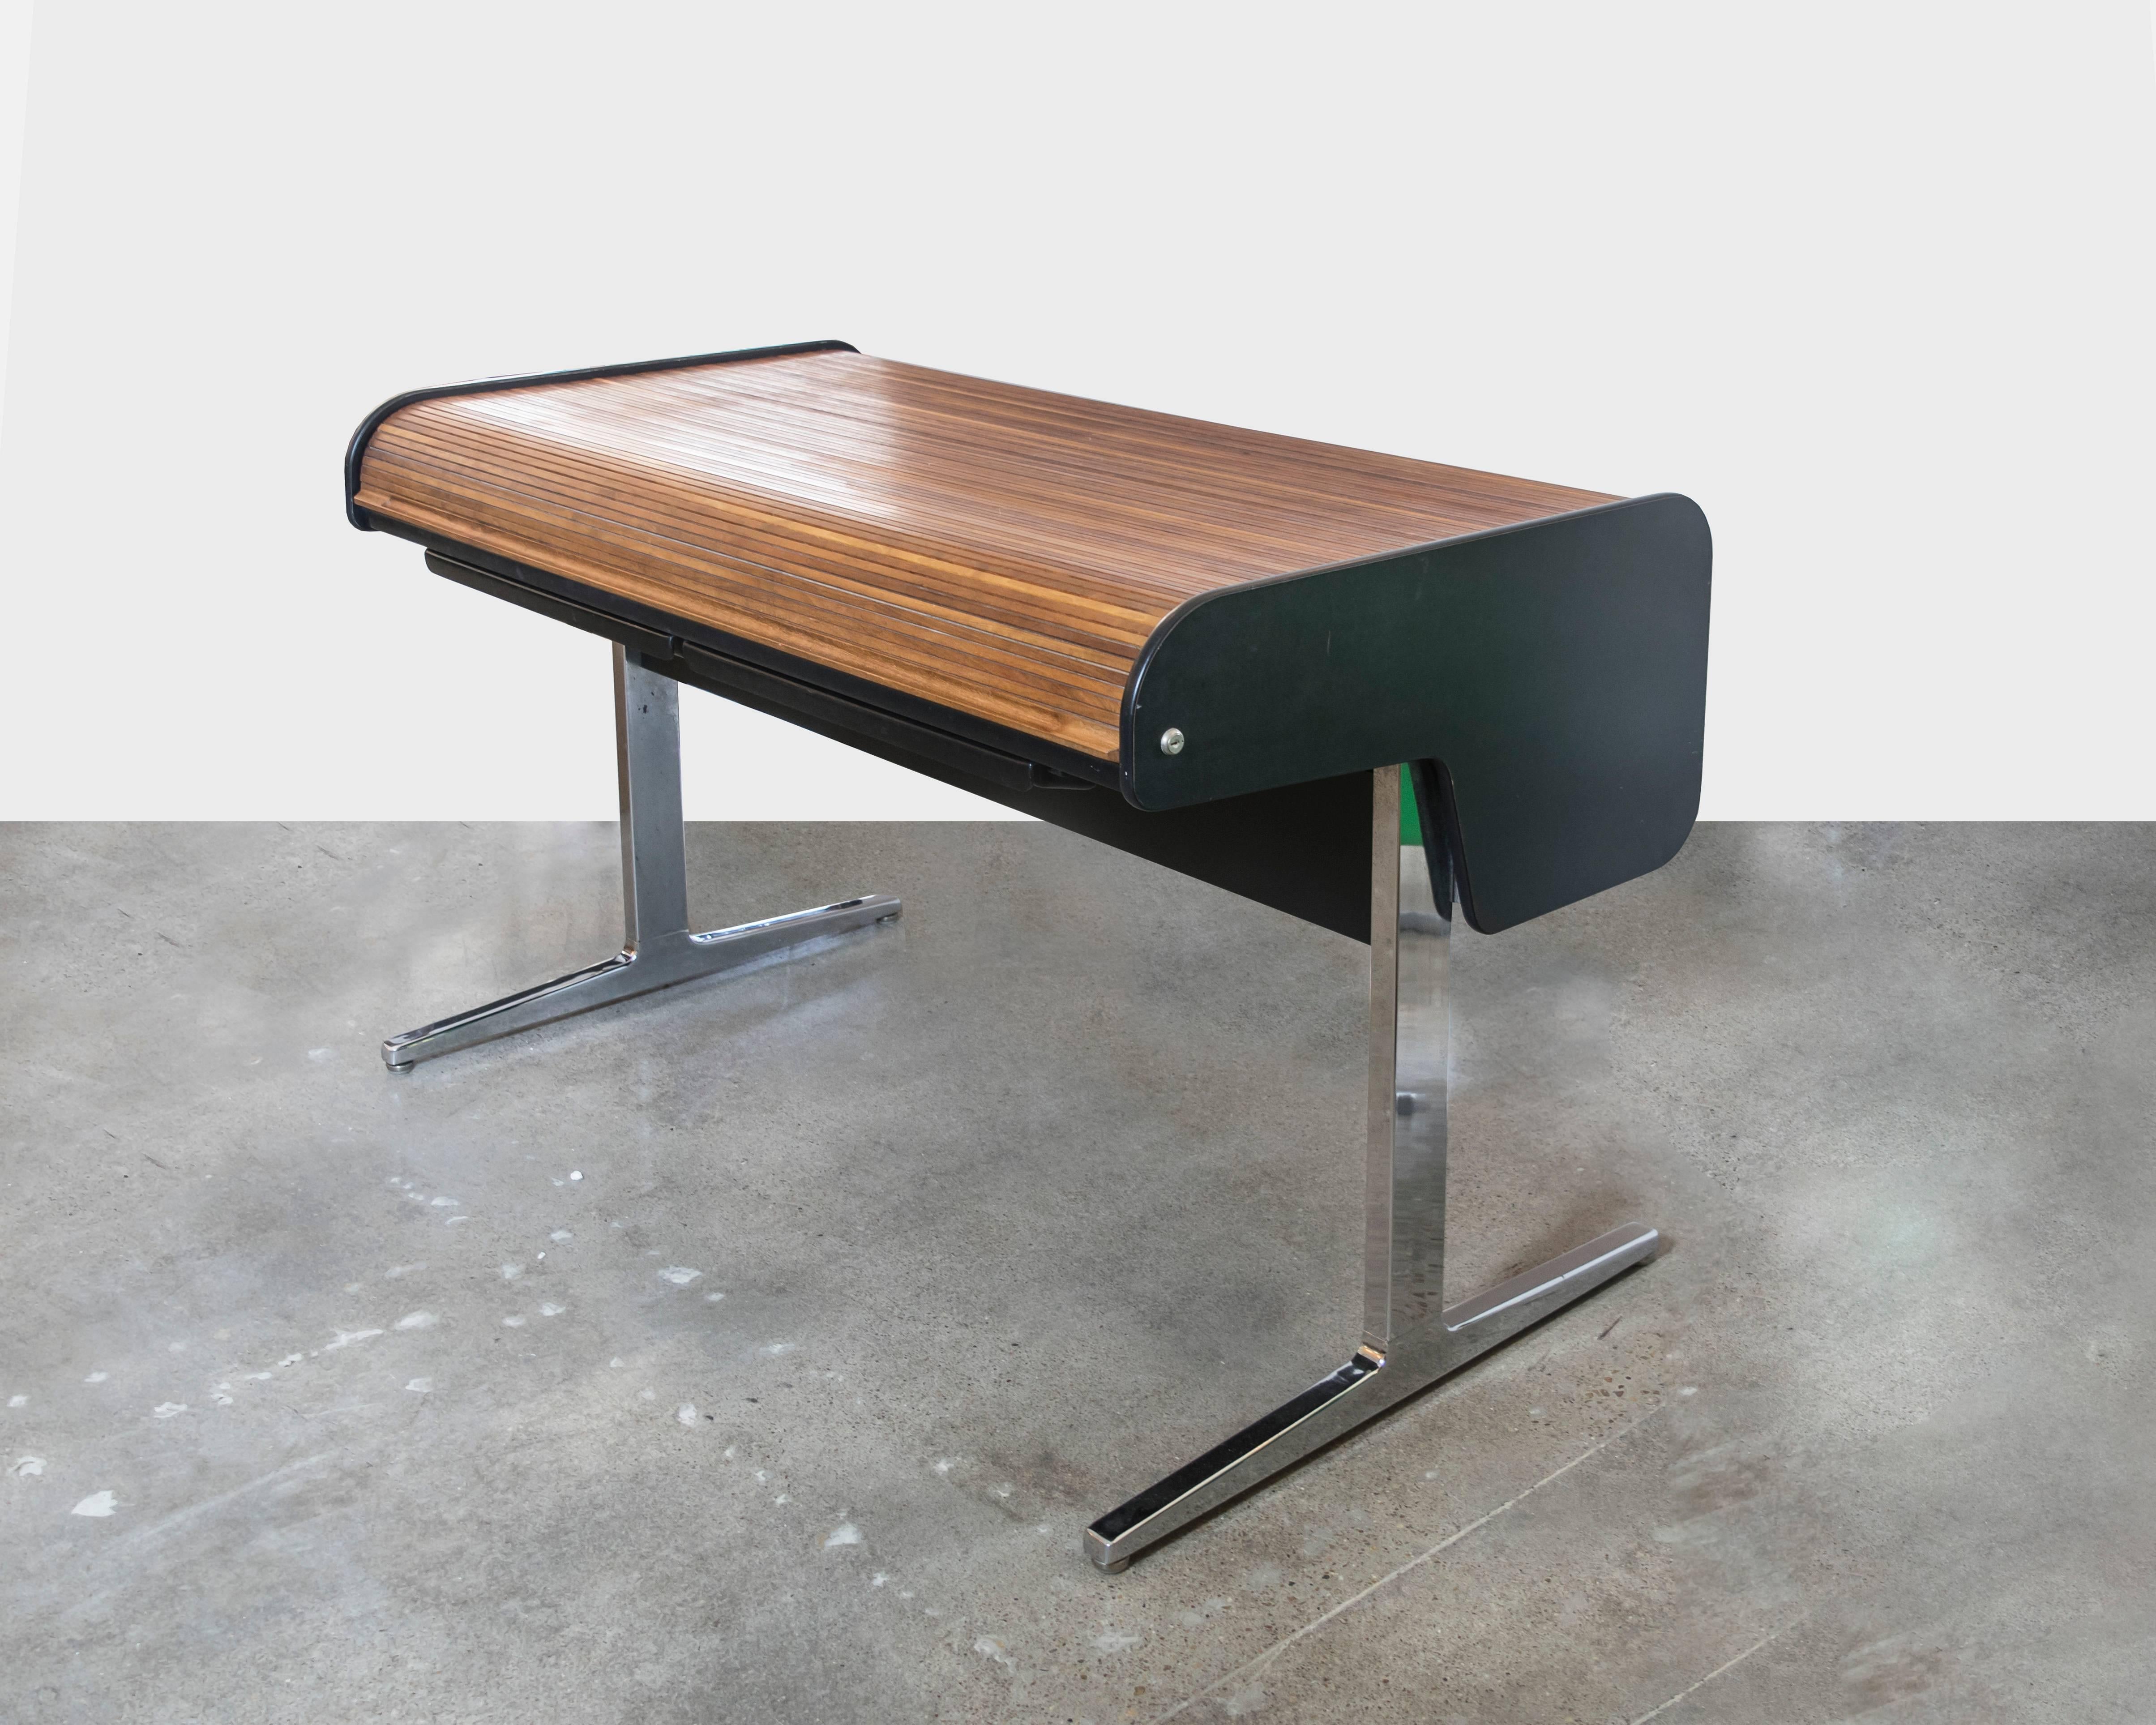 Executive "action office" desk designed by George Nelson for Herman Miller with an oak tambour roll up top and aluminum legs.